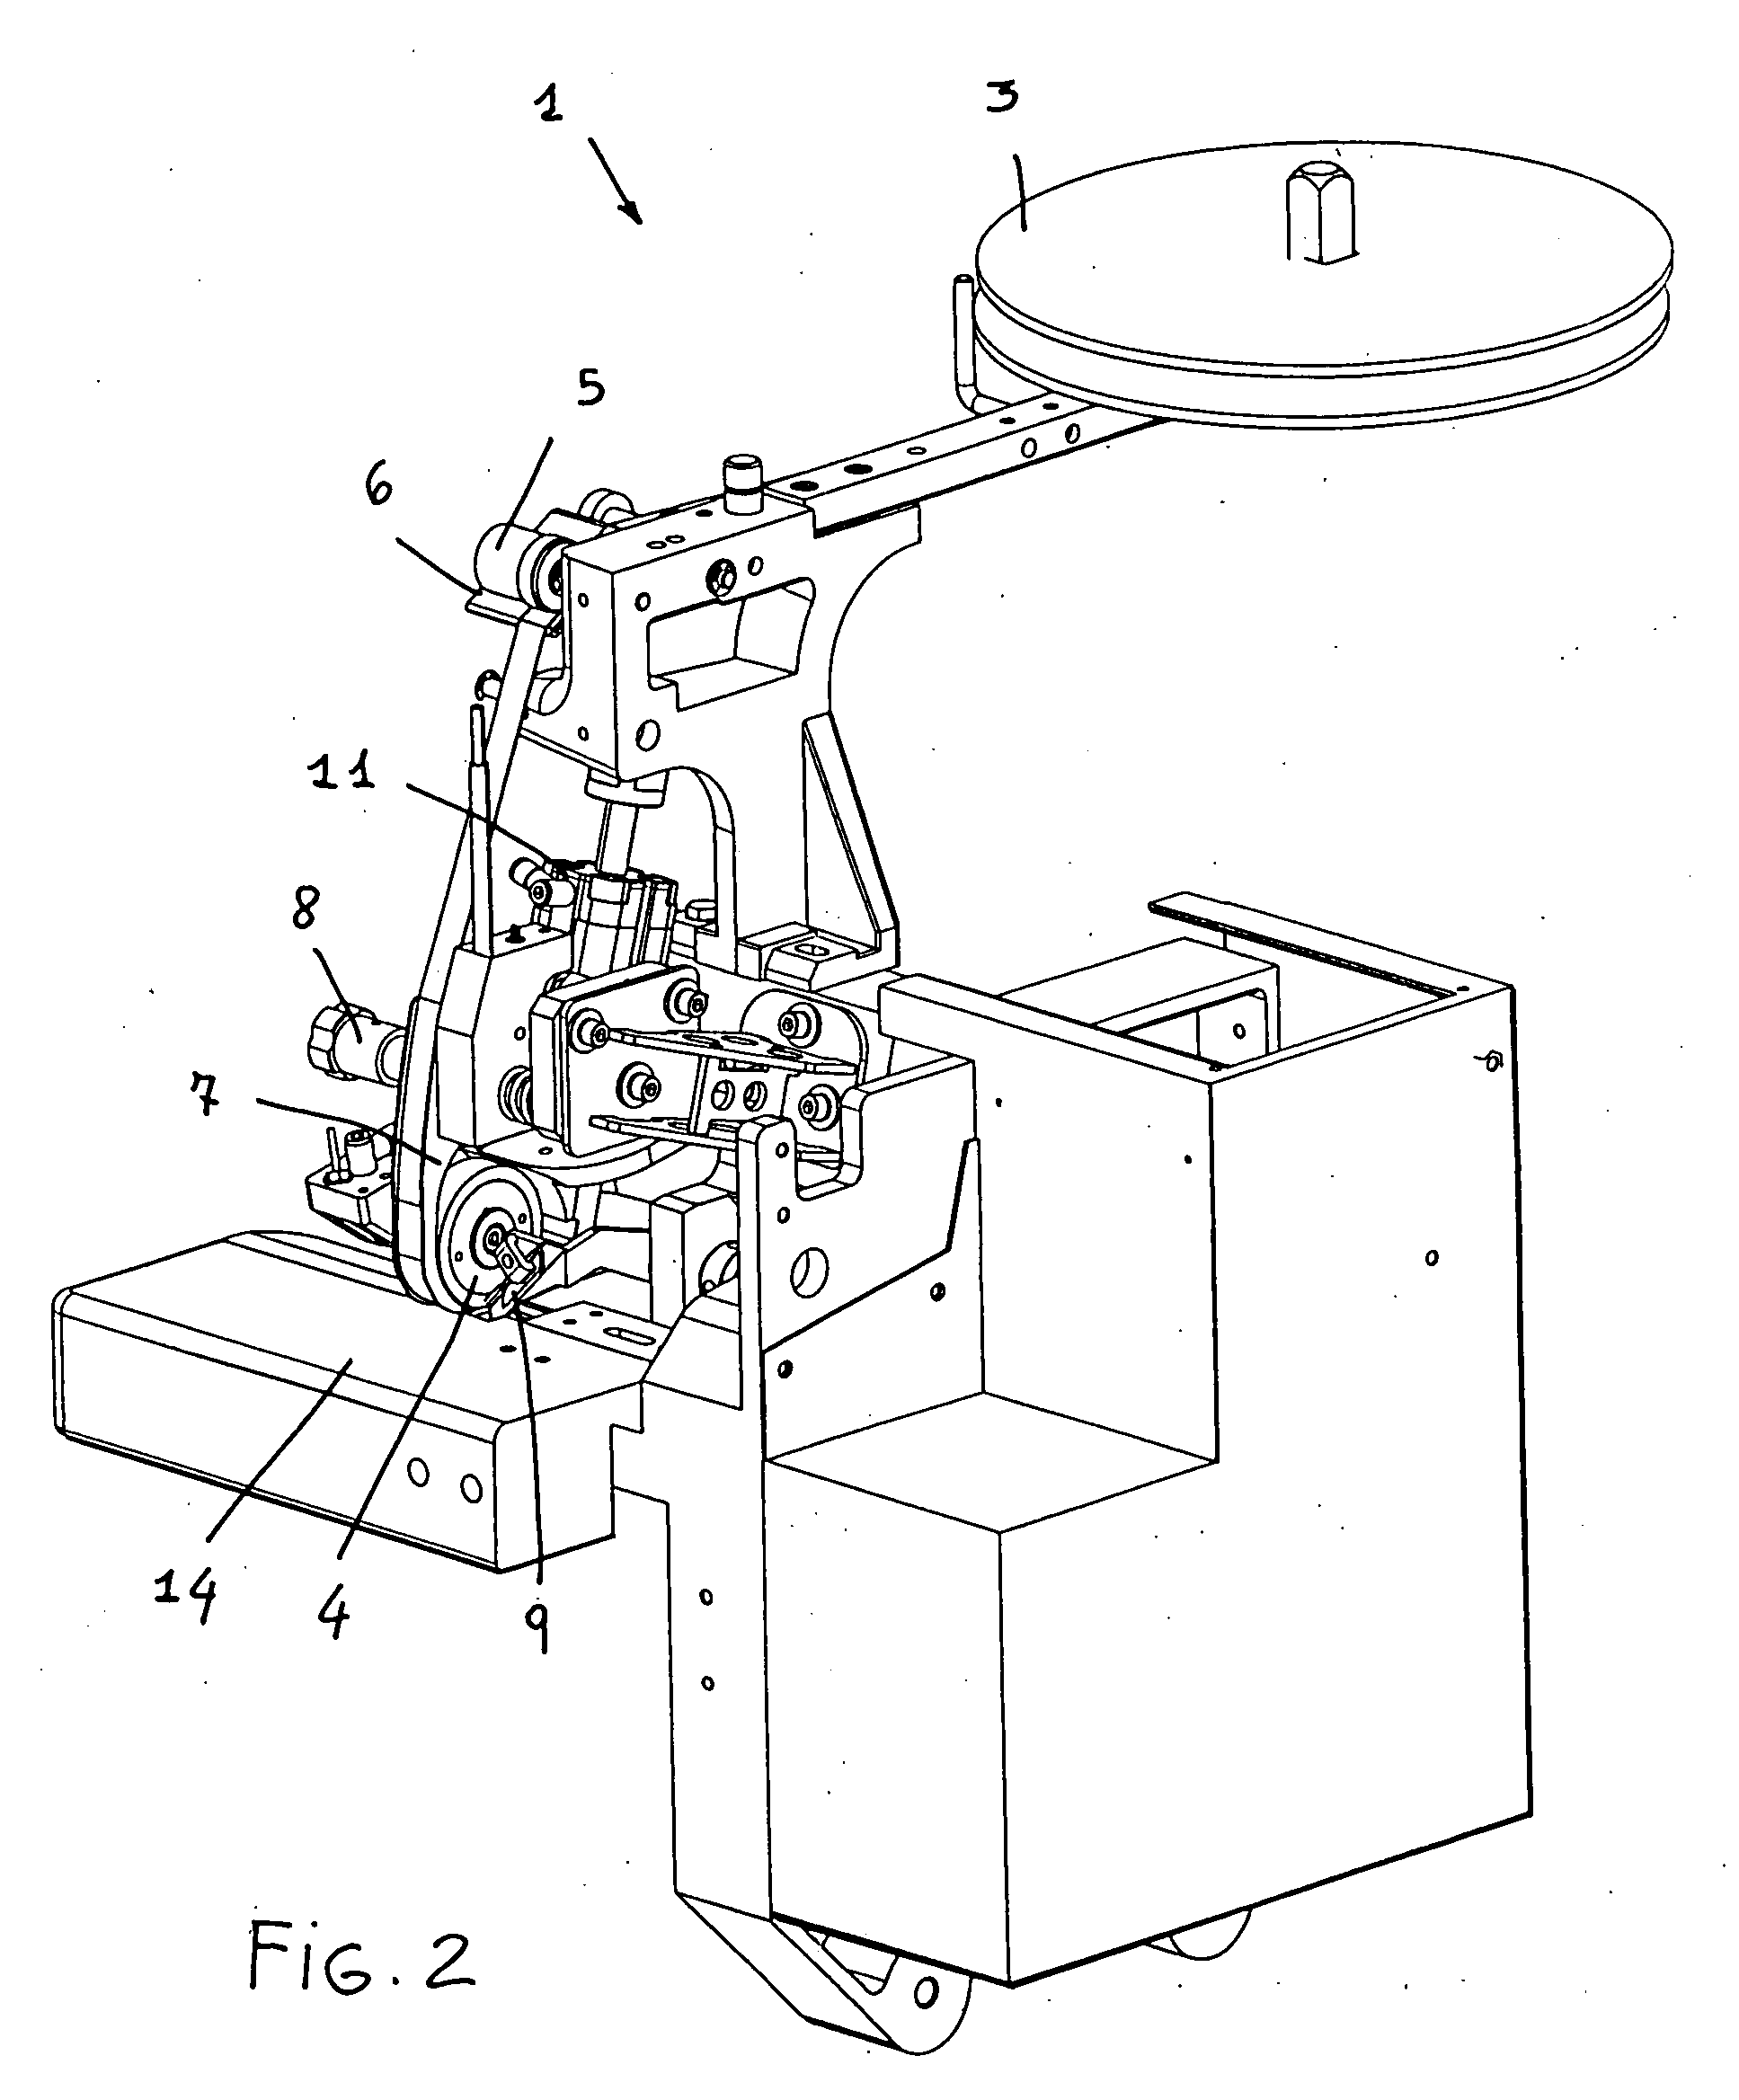 Adhesive applying apparatus for applying an adhesive compound on fabric material